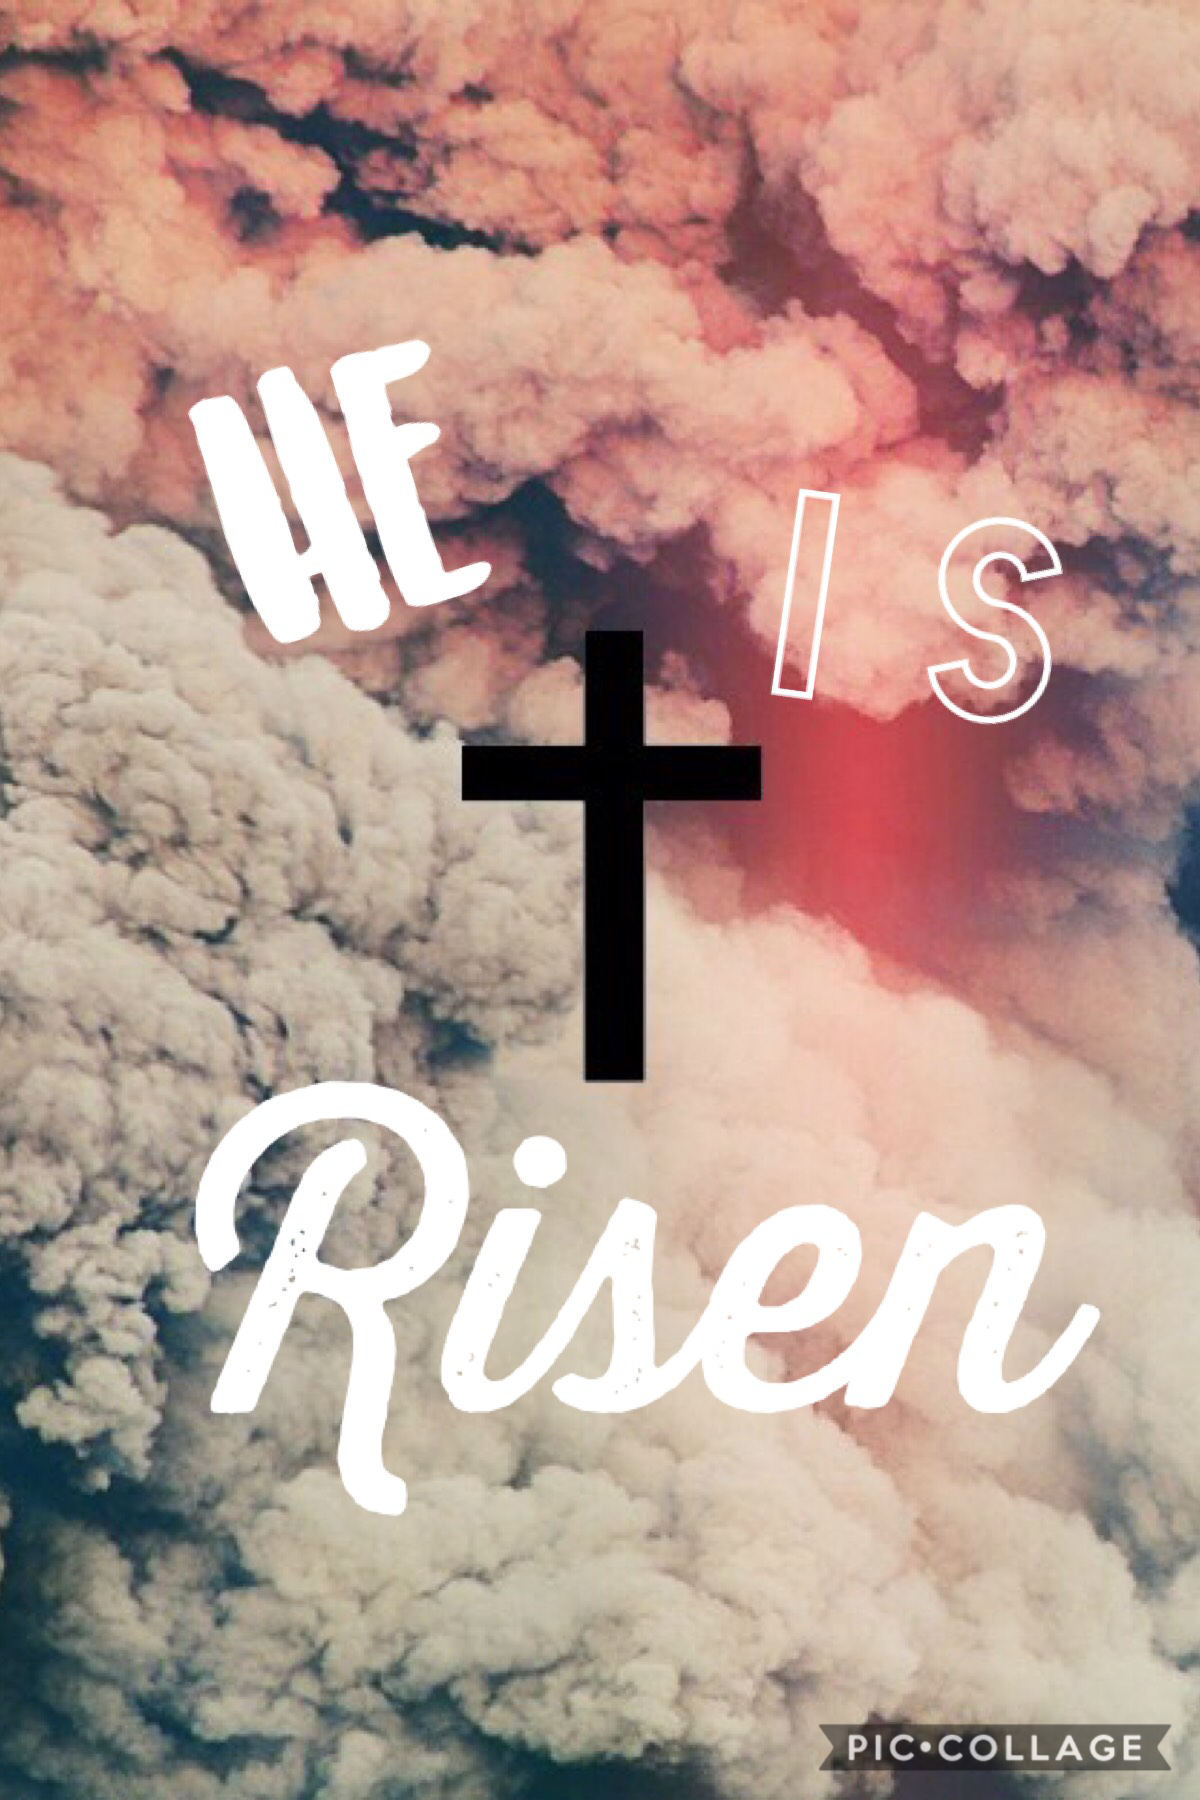 Happy Easter! 🐰🐣🐇 Click! 
Have fun on the day of chocolate bunnies and Easter eggs, but remember the true reason of Easter! 😃 Jesus died on the cross for your sins. Today, through all your bad times, remember Jesus loves you! 😍 Happy Easter! 😋